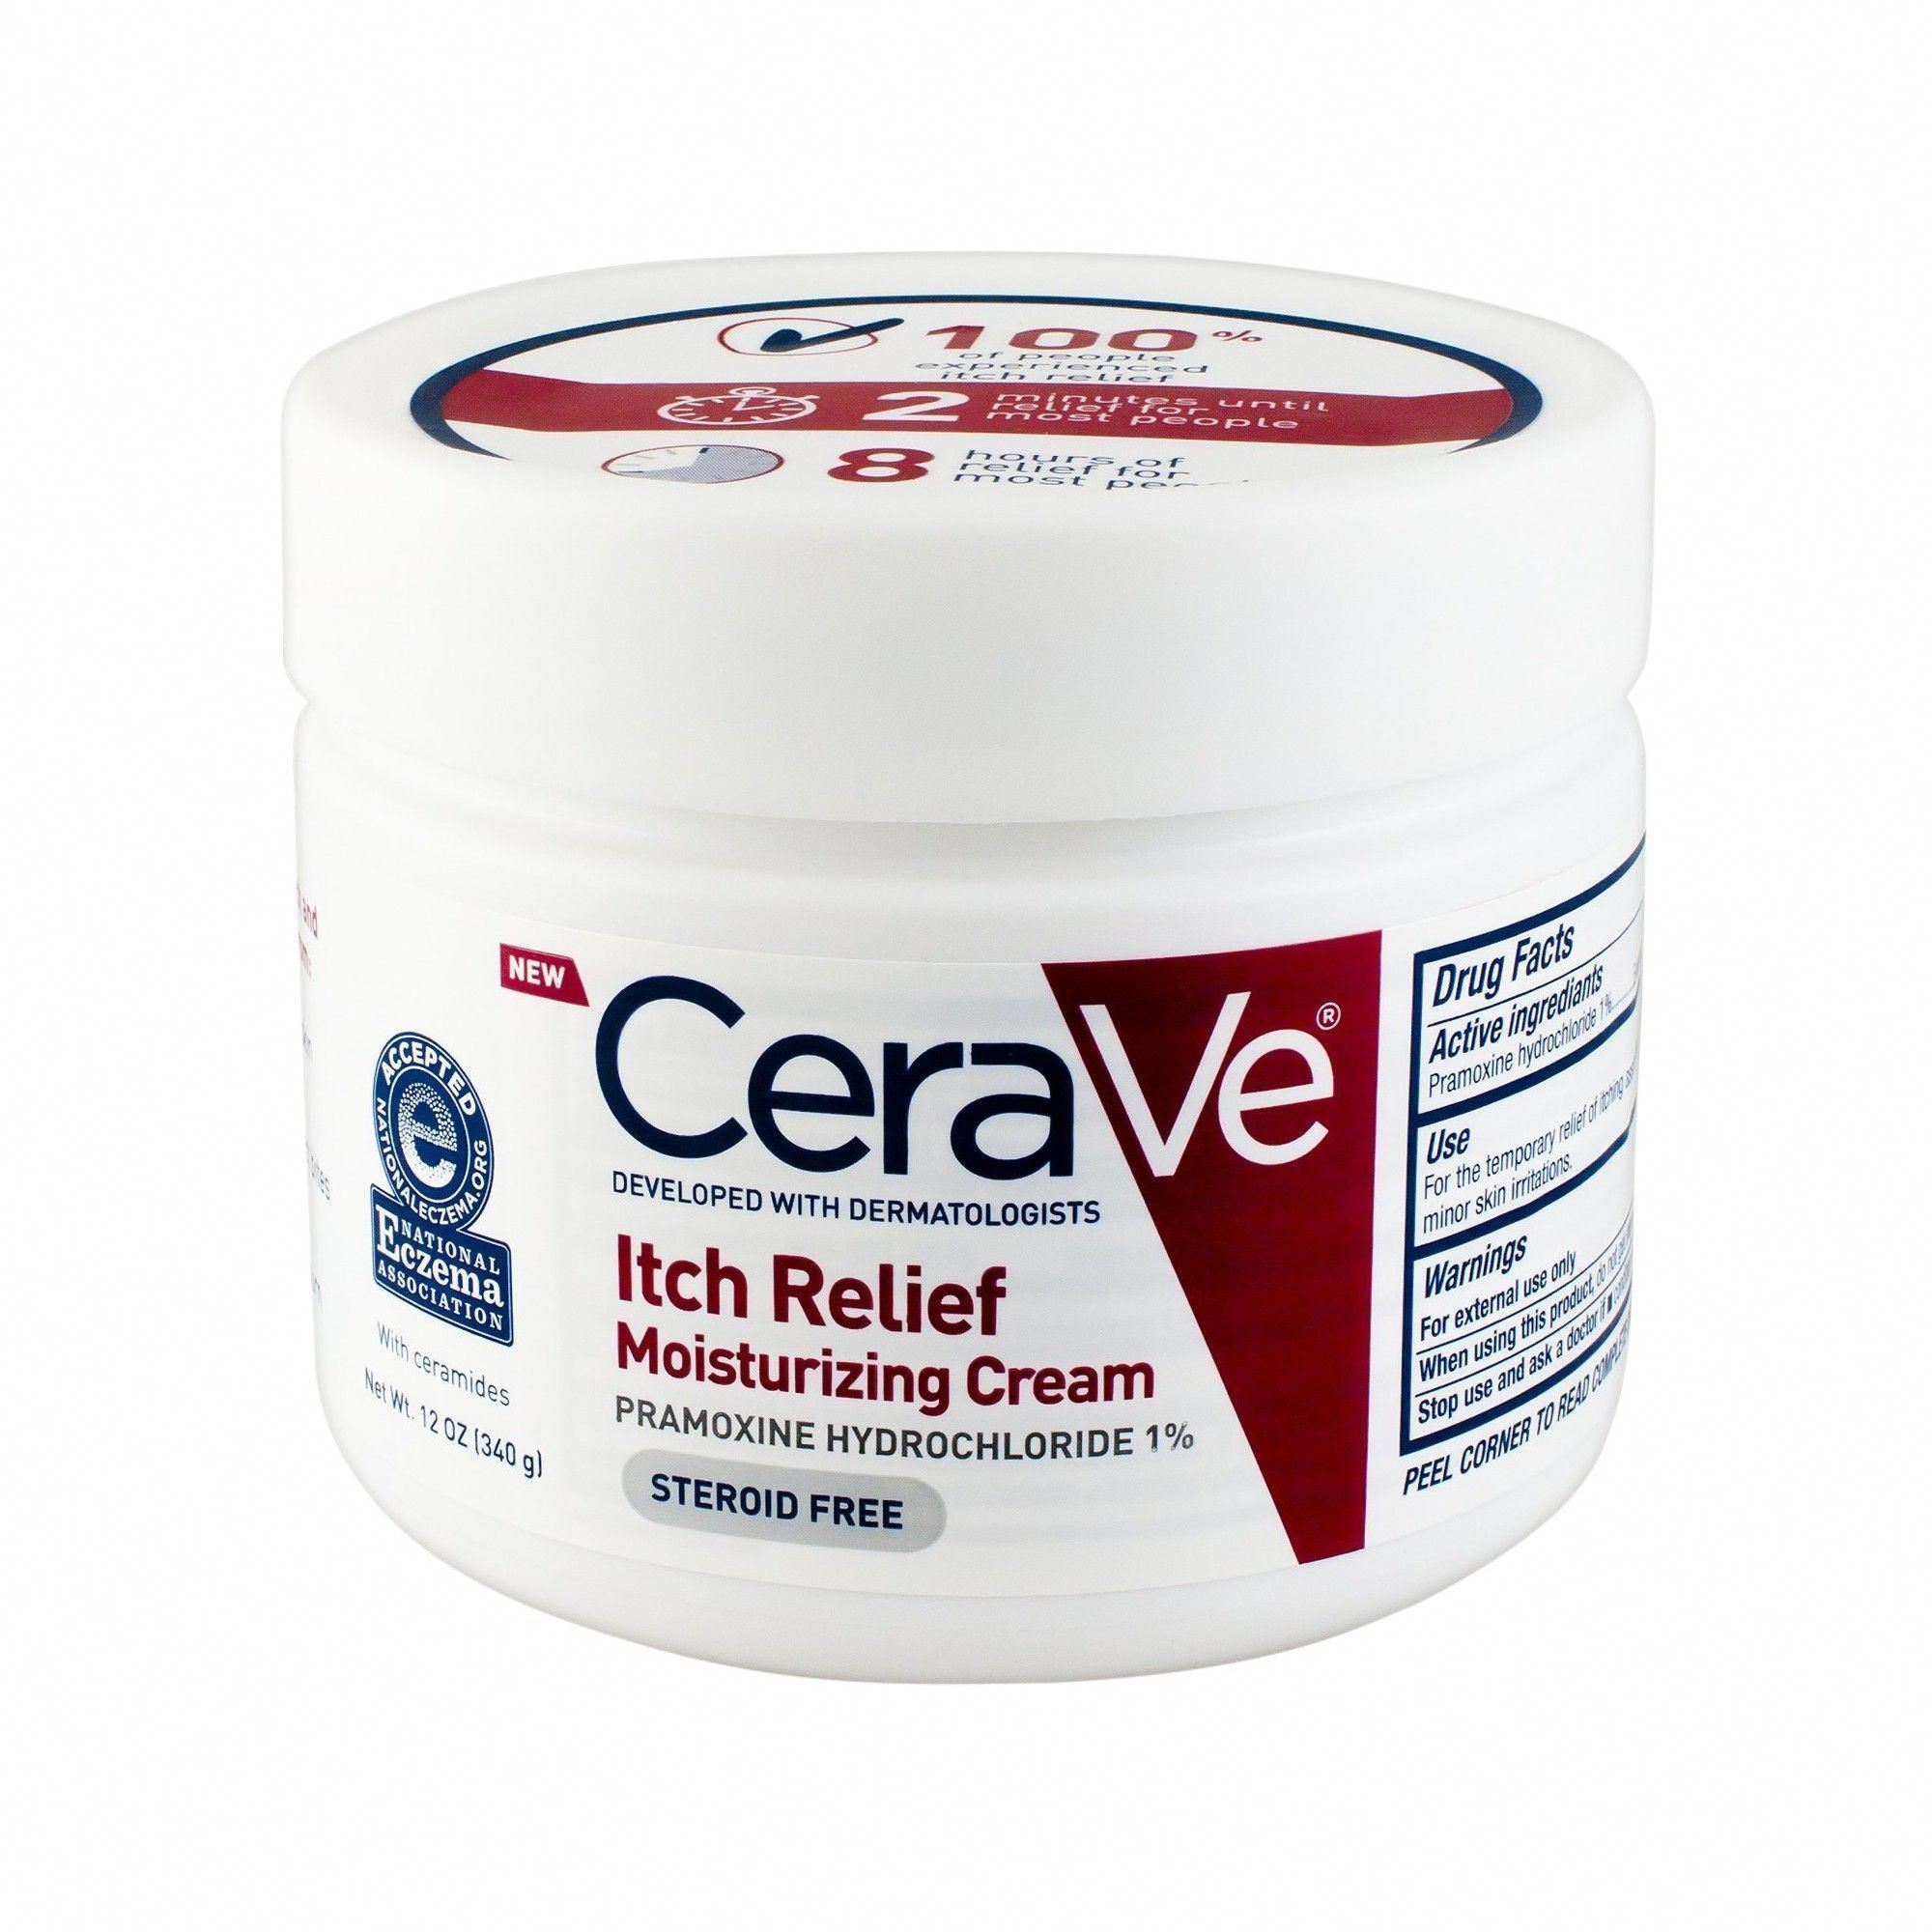 CeraVe Itch Relief Moisturizing Cream for Dry and Itchy Skin